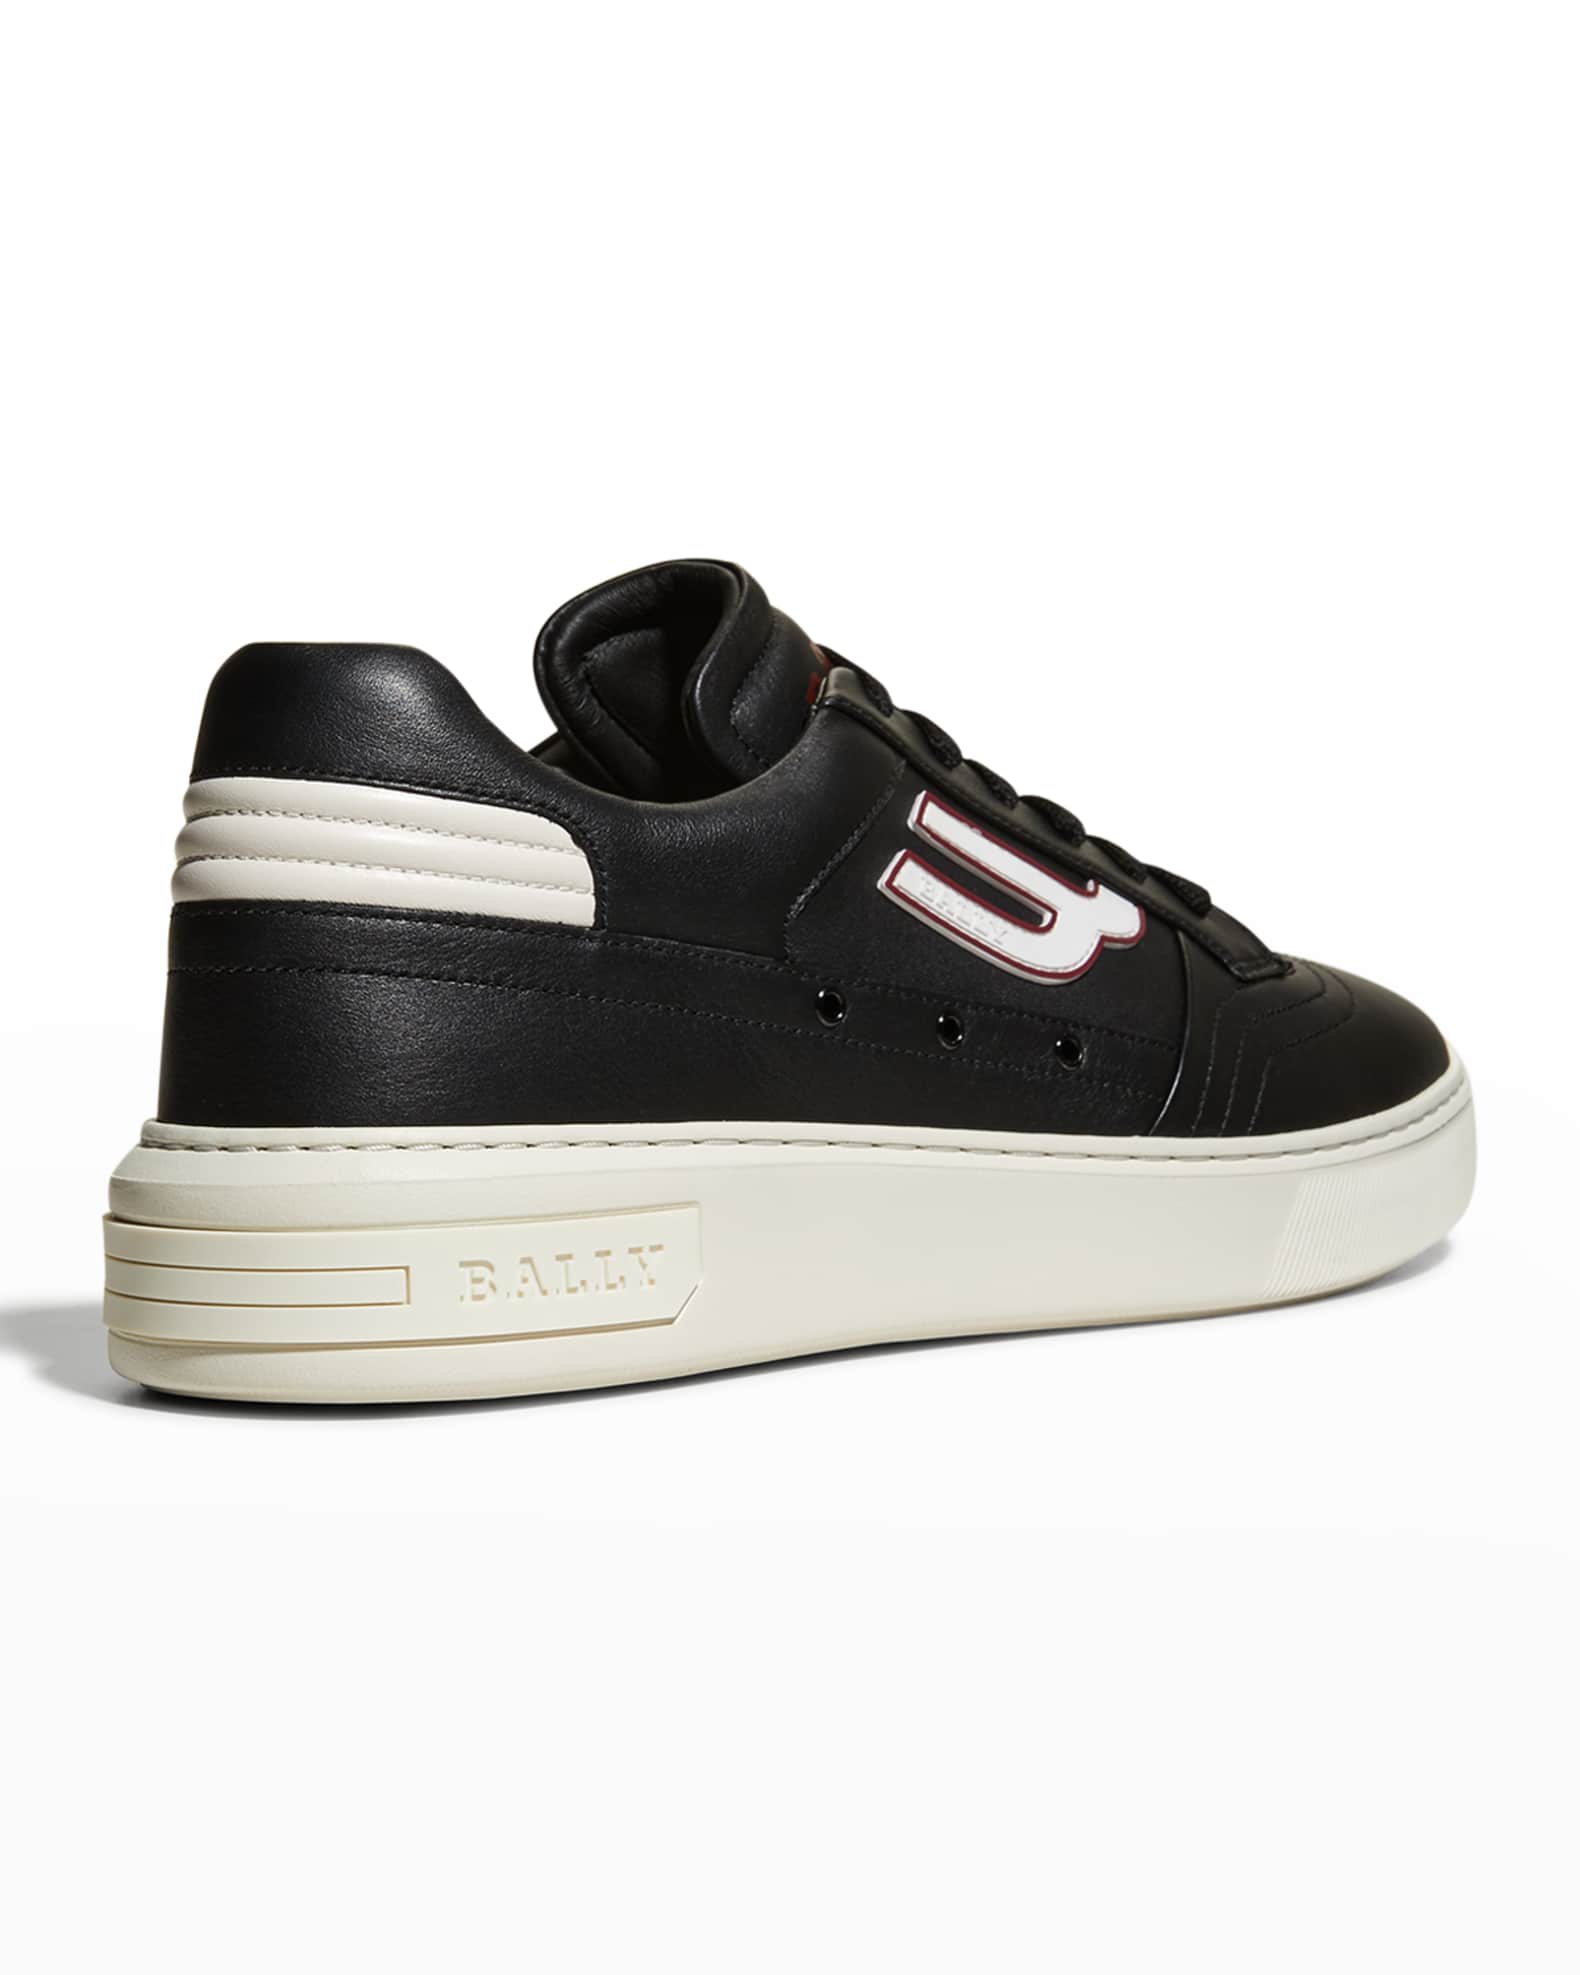 Bally Men's Triumph Leather Low-Top Sneakers | Neiman Marcus